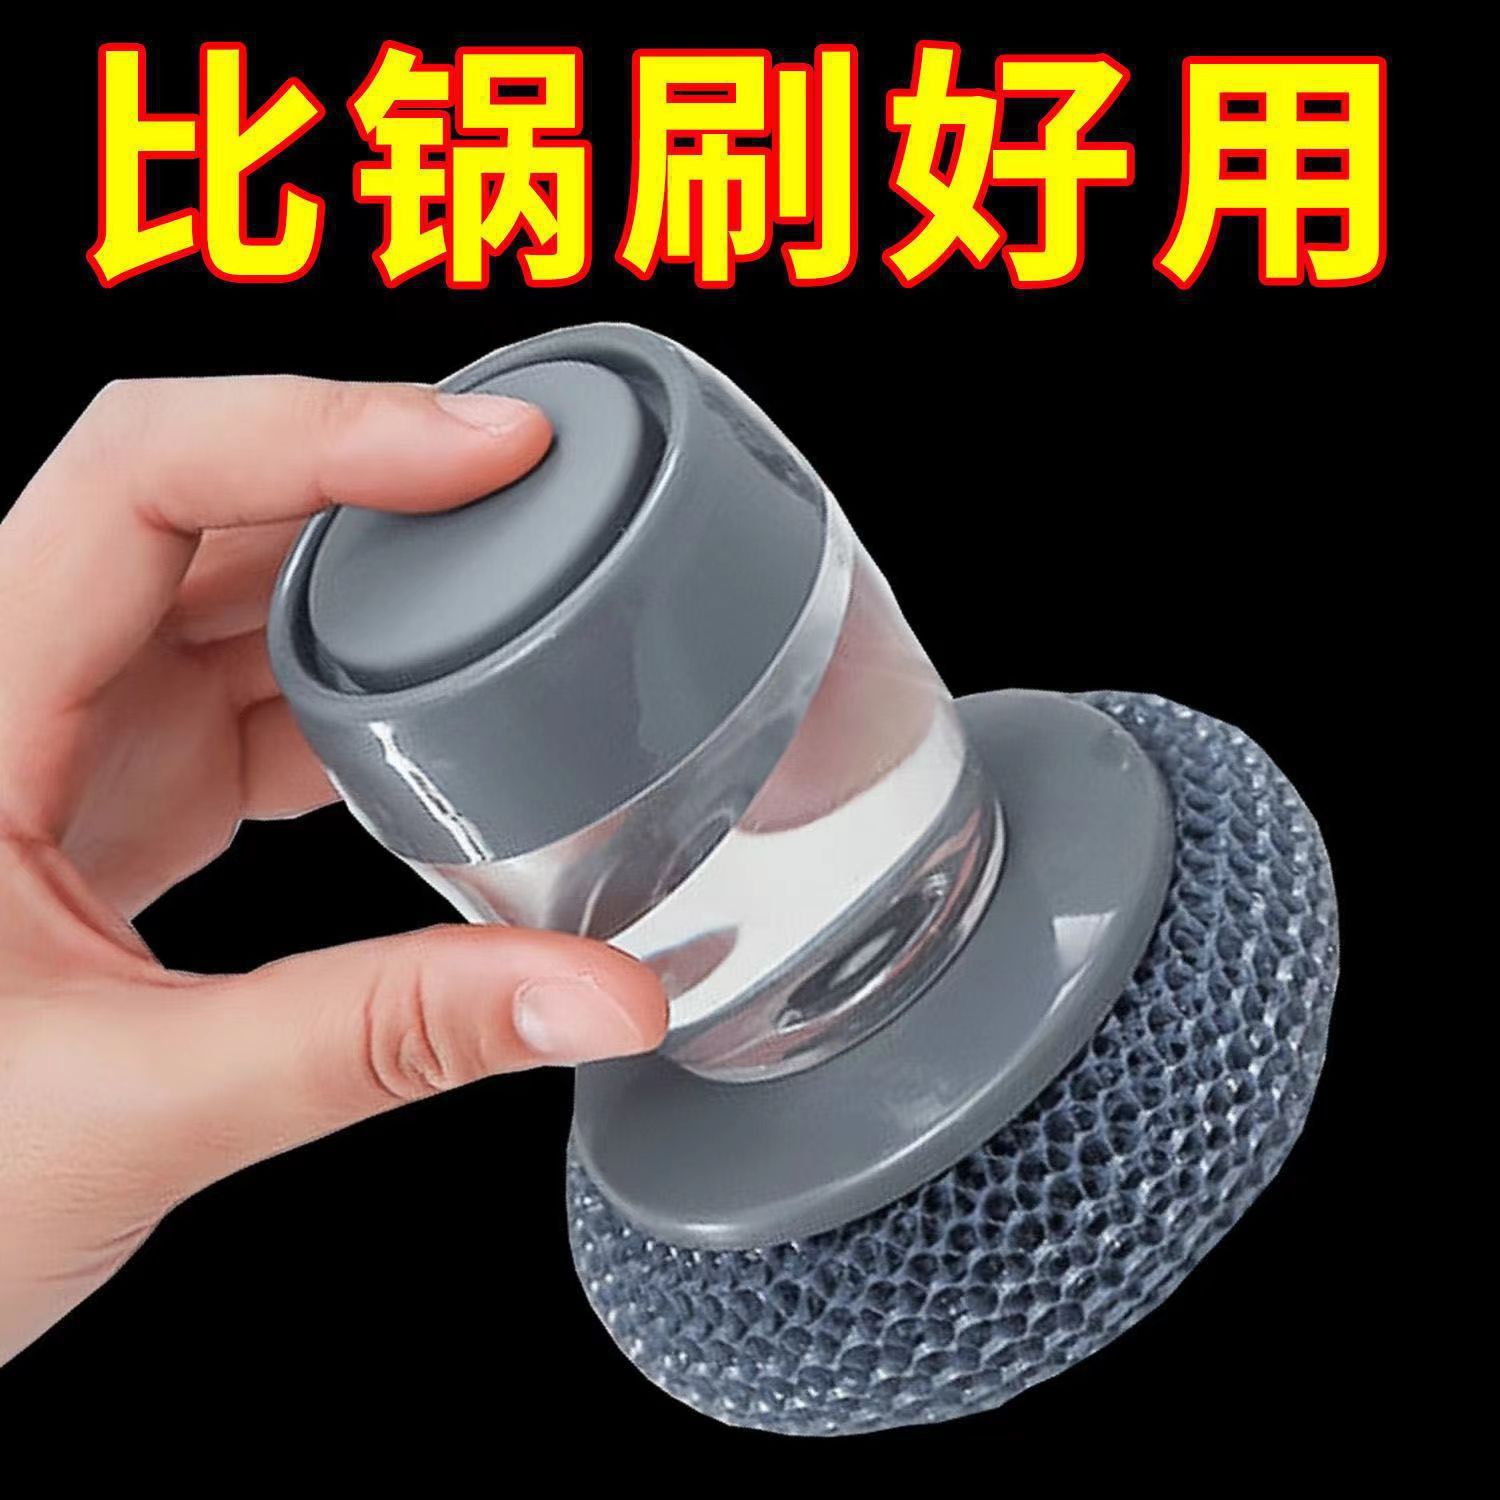 Factory Direct Sales [Can Be Sent on Behalf] Multi-Functional Dishwashing Brush with Liquid, Kitchen Cleaning Steel Wire Ball Cleaning Brush Wok Brush